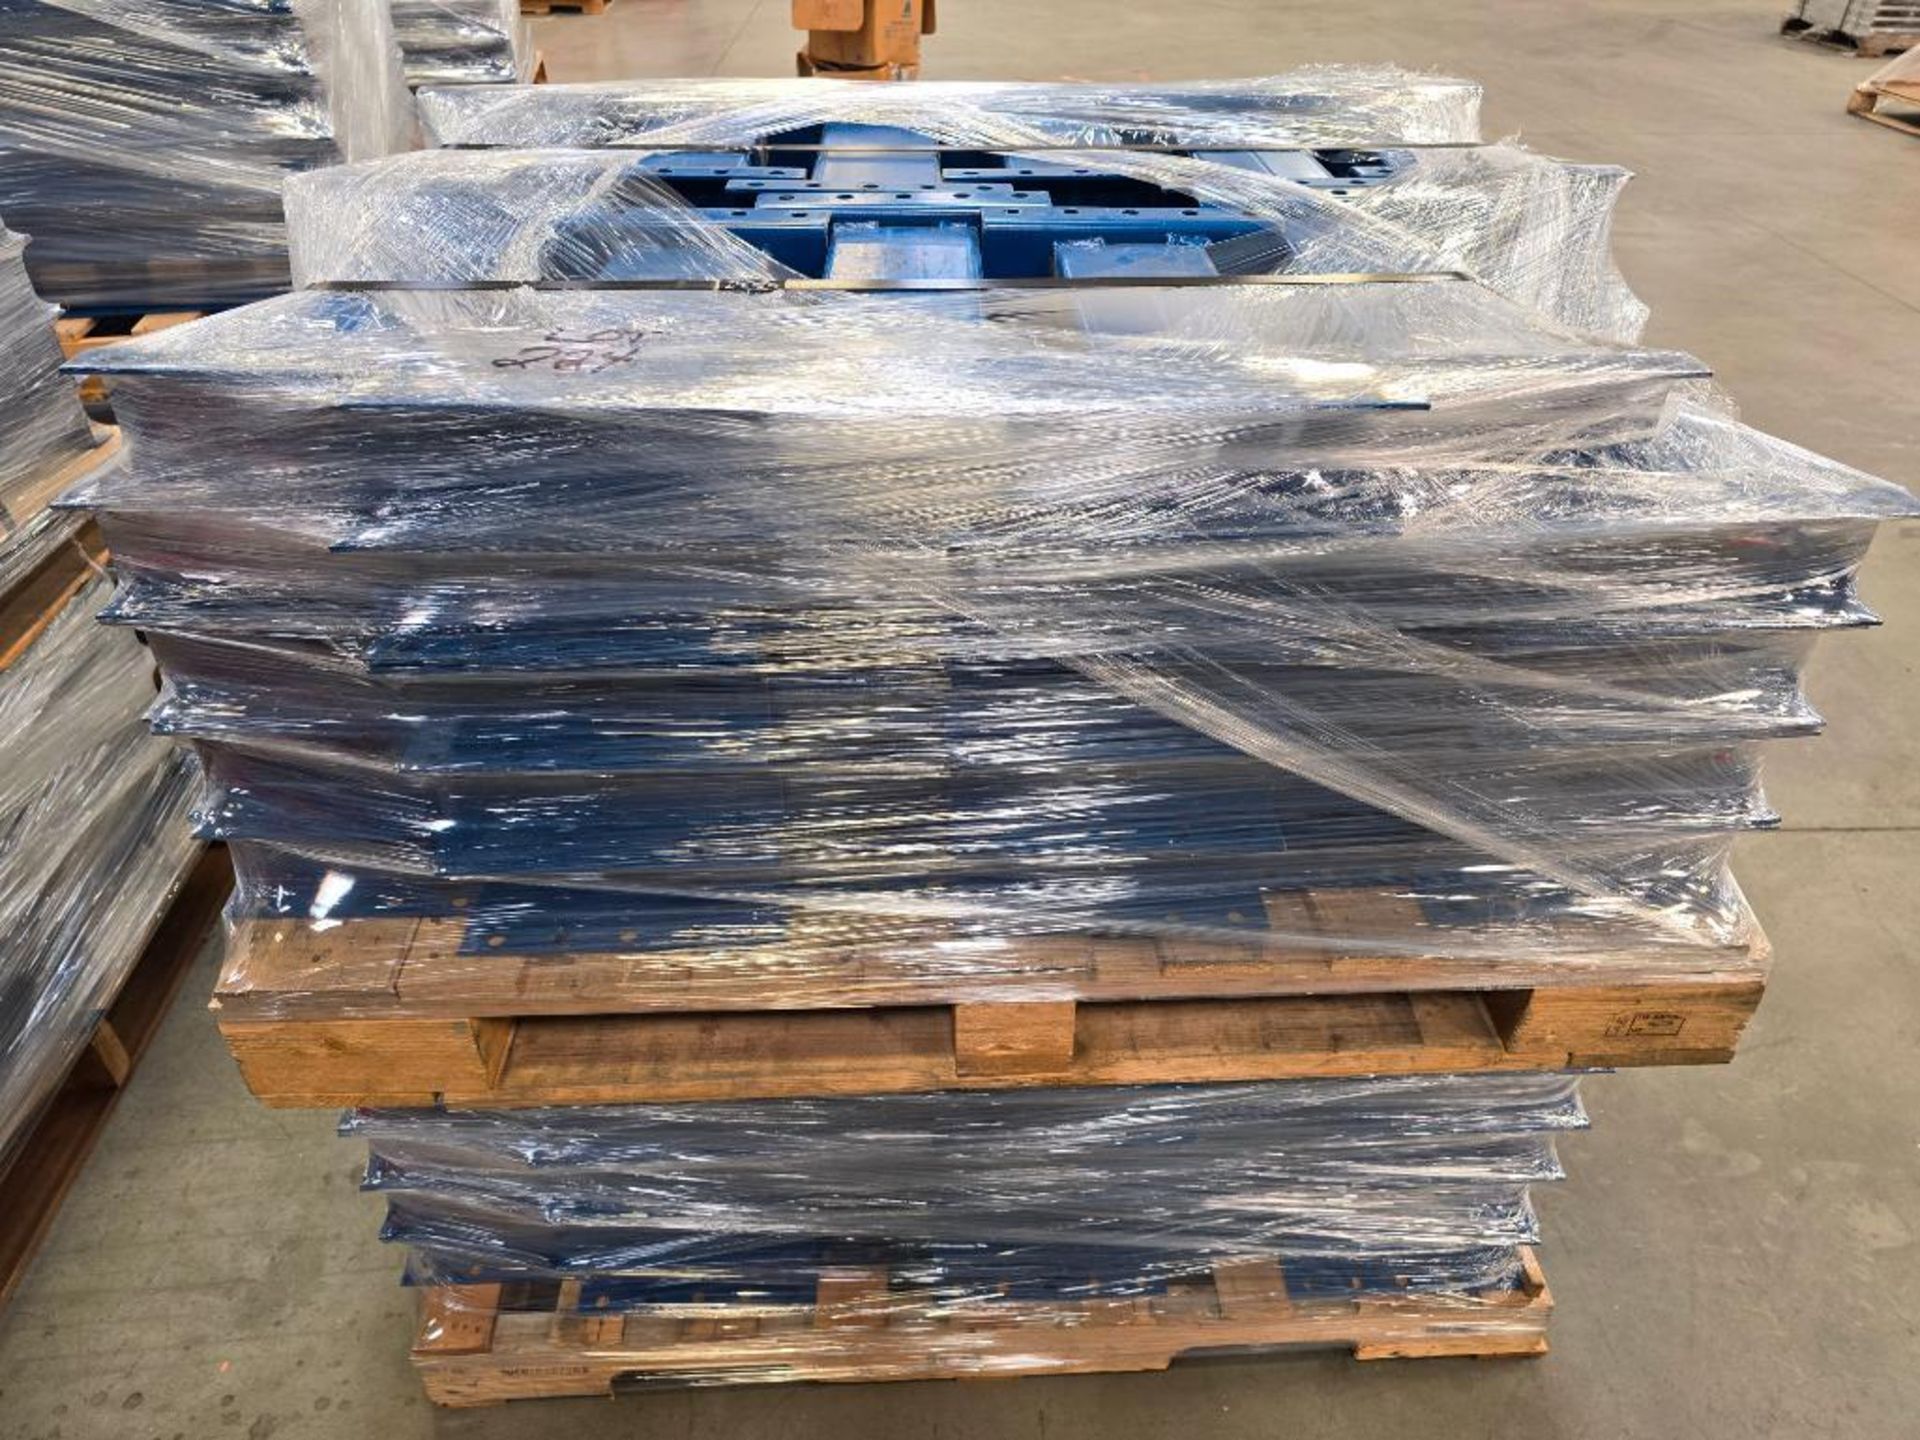 Skid Of Approx. (60) 14" Pallet Rack Row Spacers, ($25 Loading Fee Will Be Added to Buyer's Invoice)